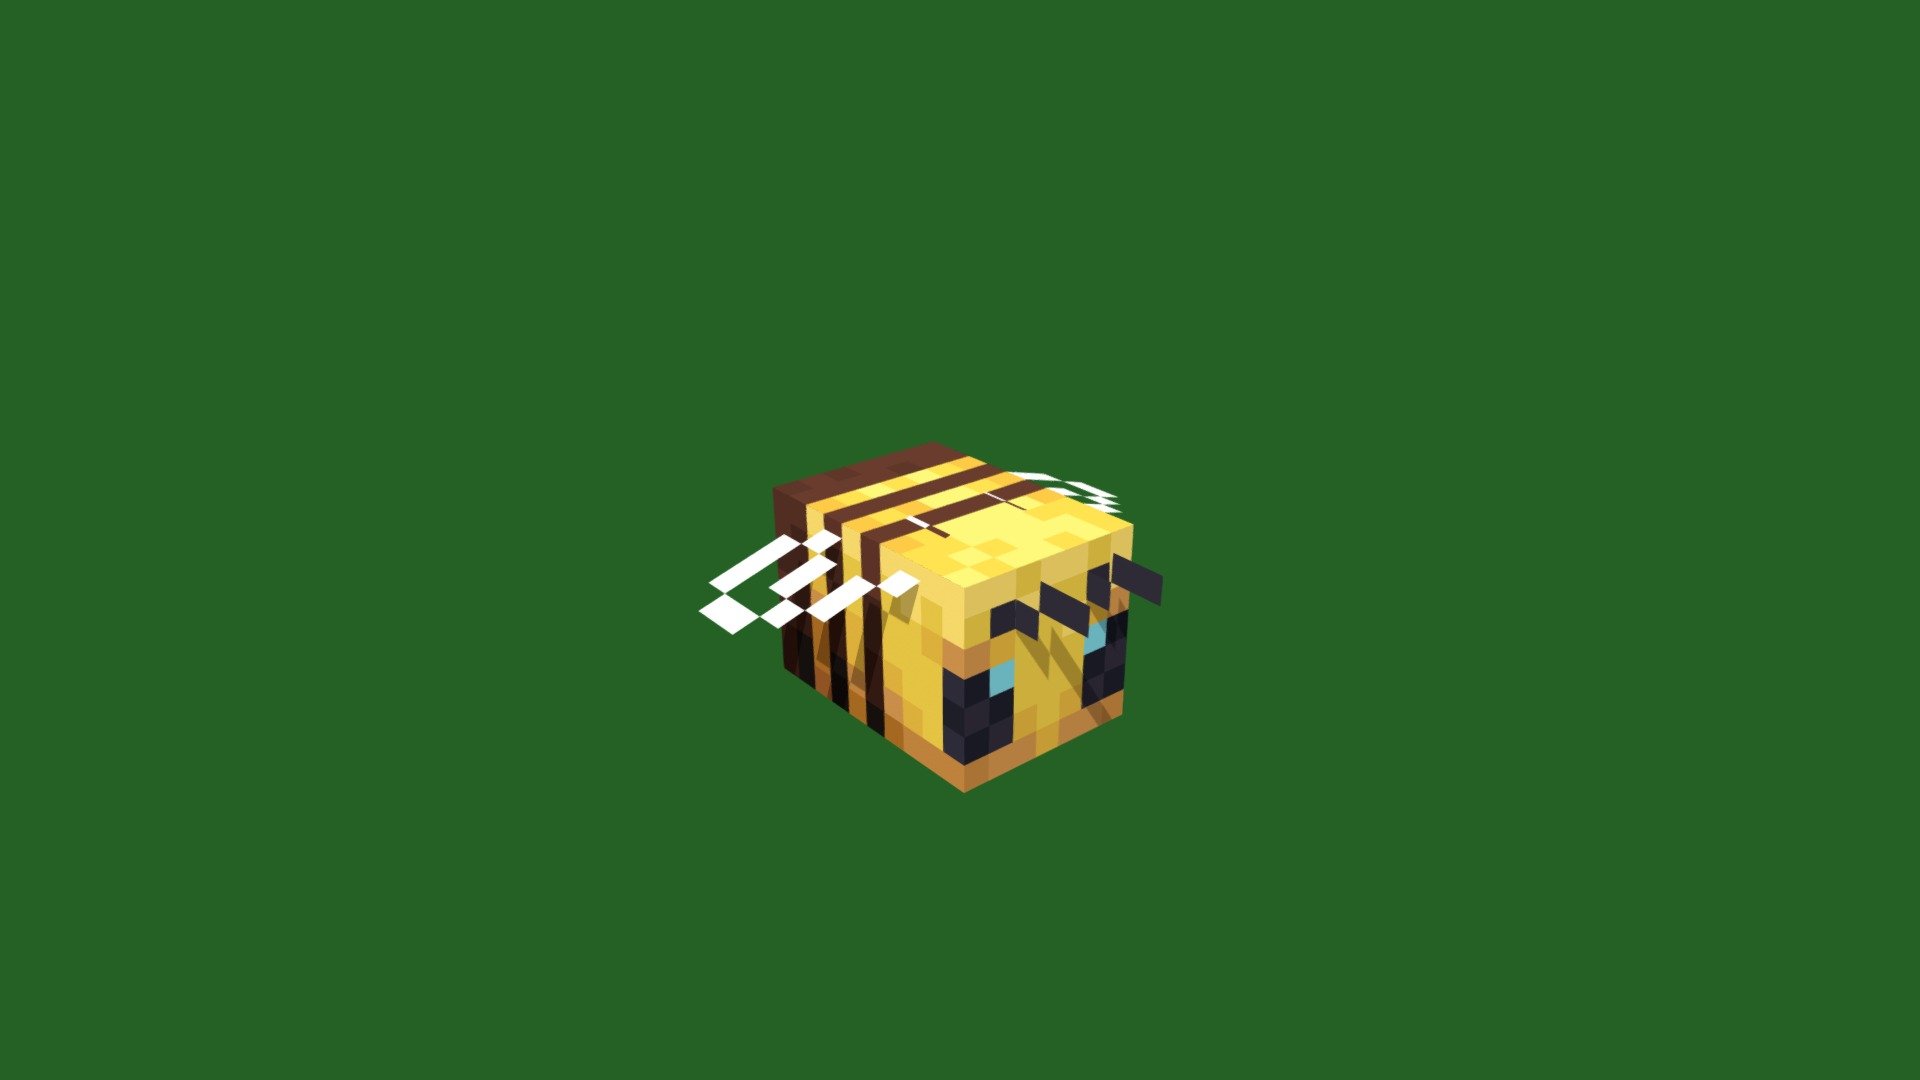 Pride Minecraft Bee Icon  Bee icon Minecraft wallpaper Aesthetic  wallpapers